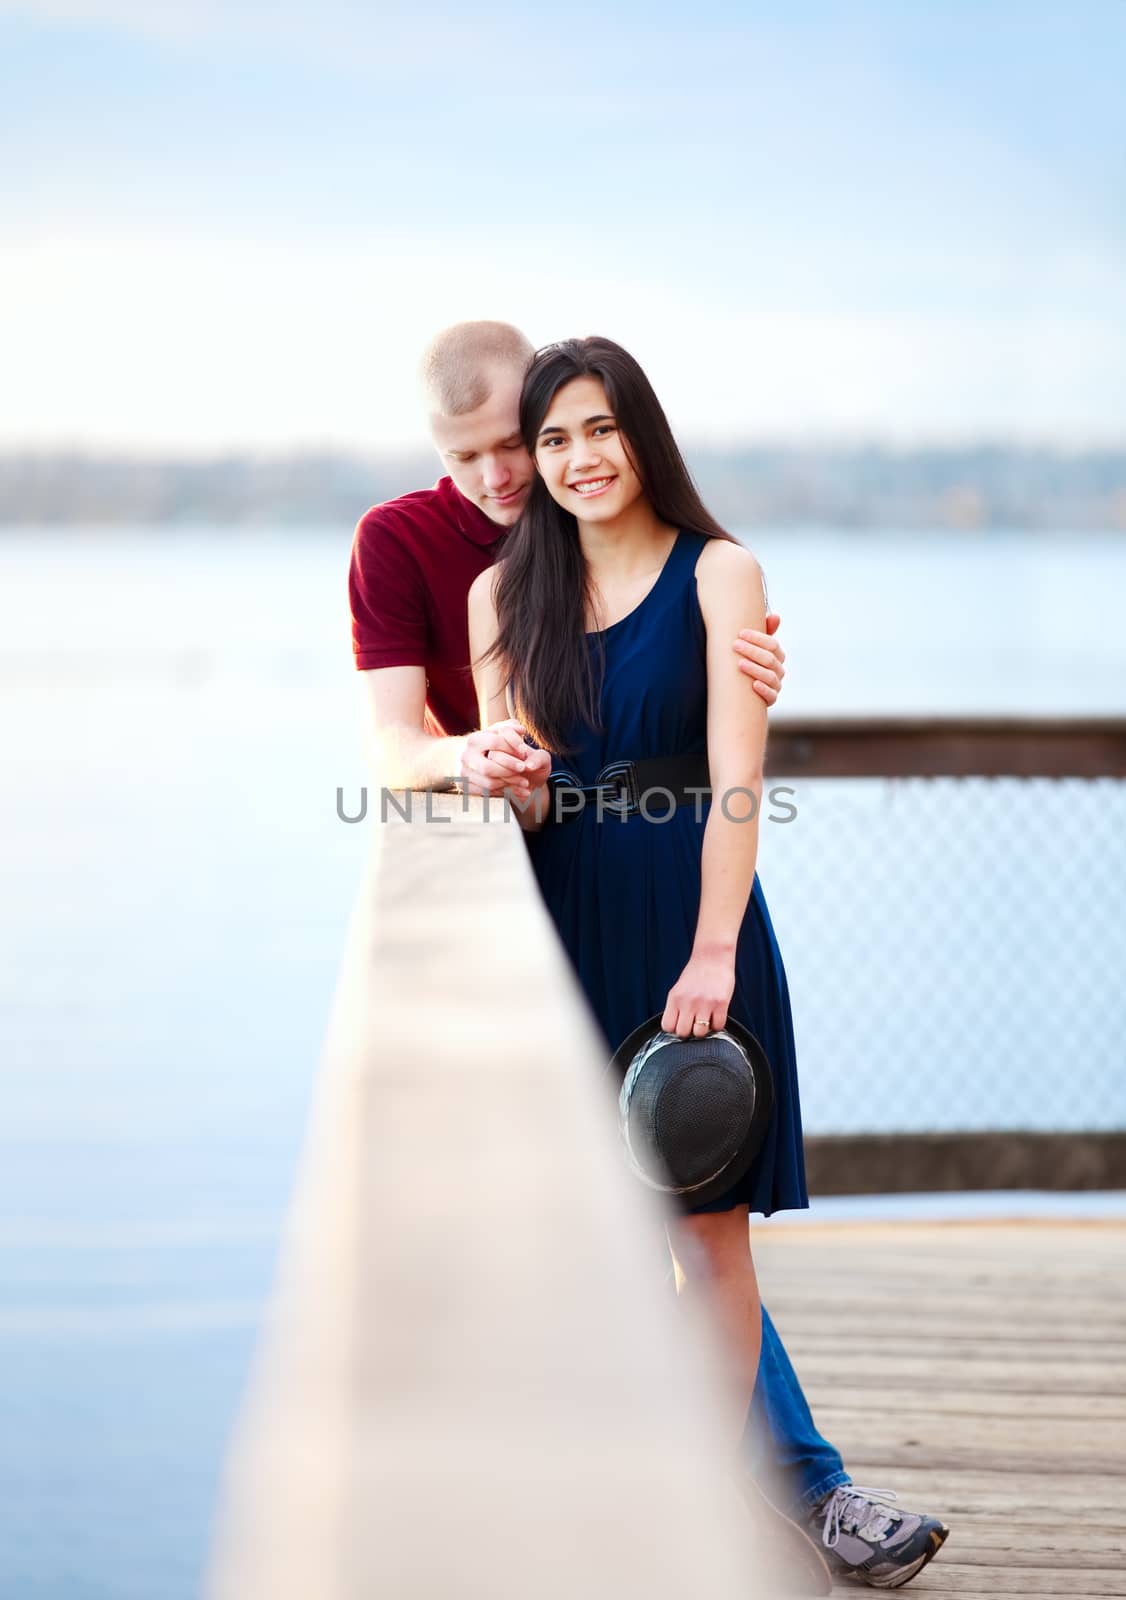 Young interracial couple standing together on wooden pier overlo by jarenwicklund